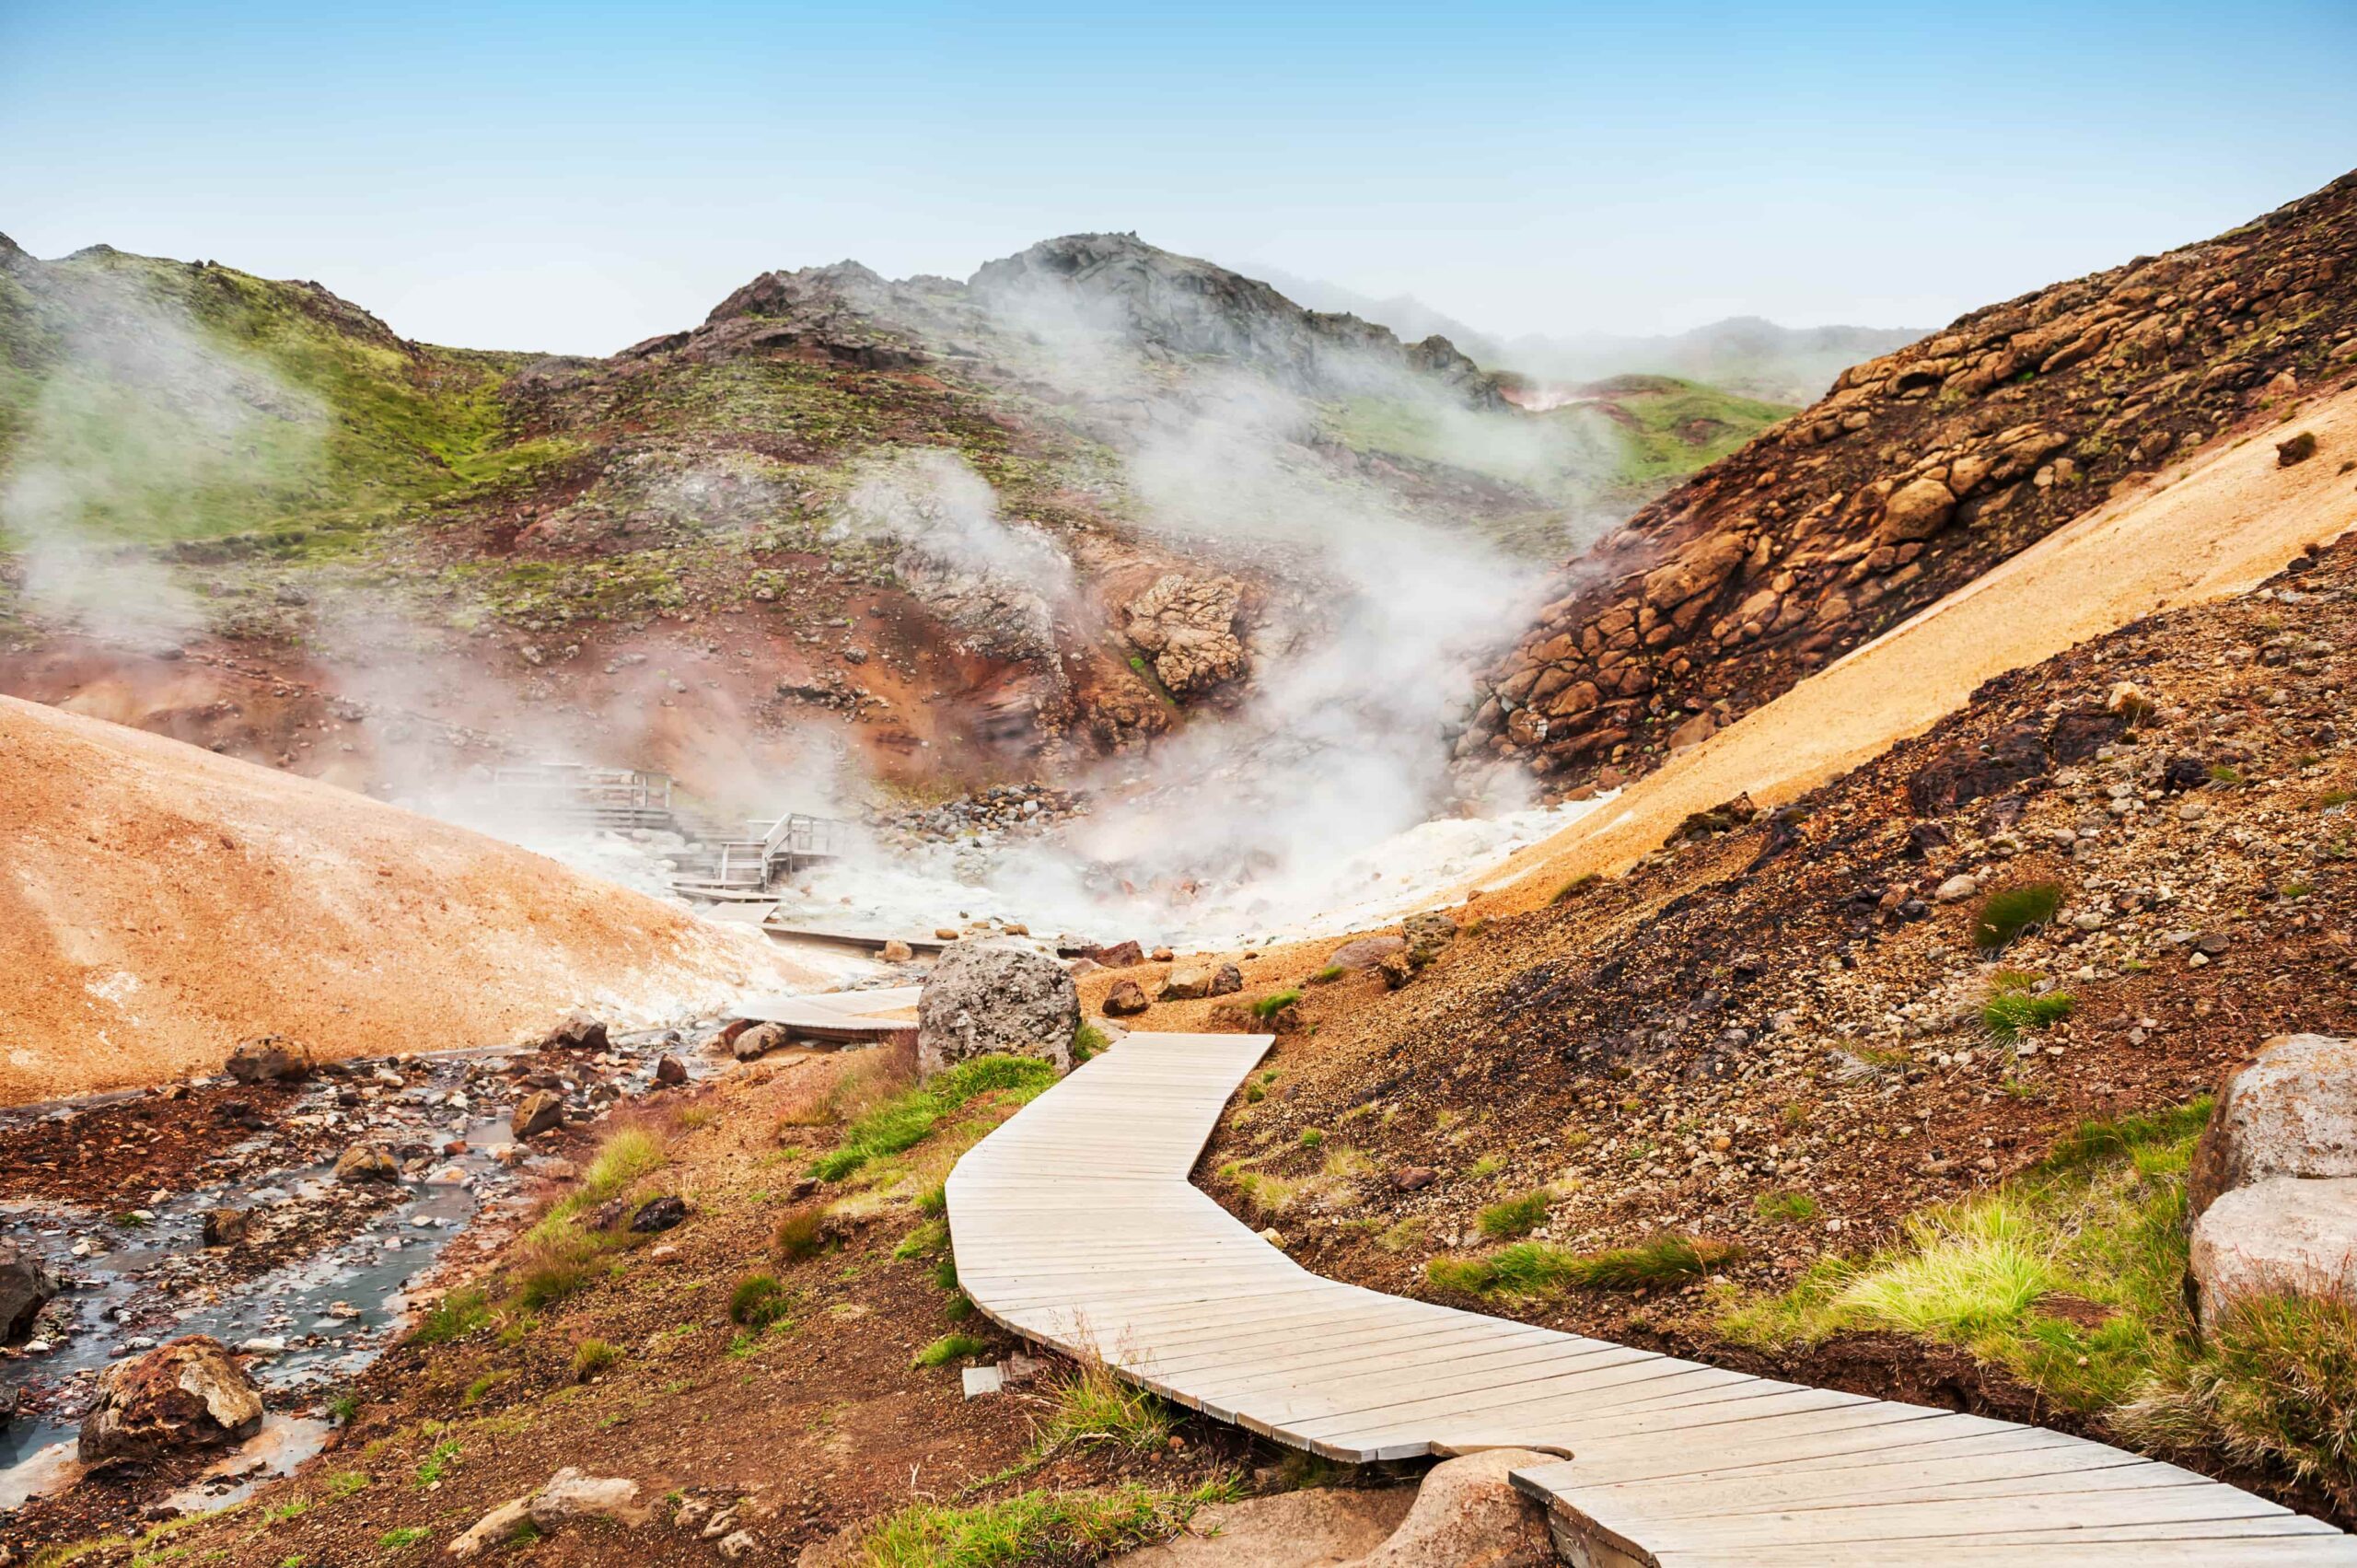 A picture of the Seltun Geothermal Area